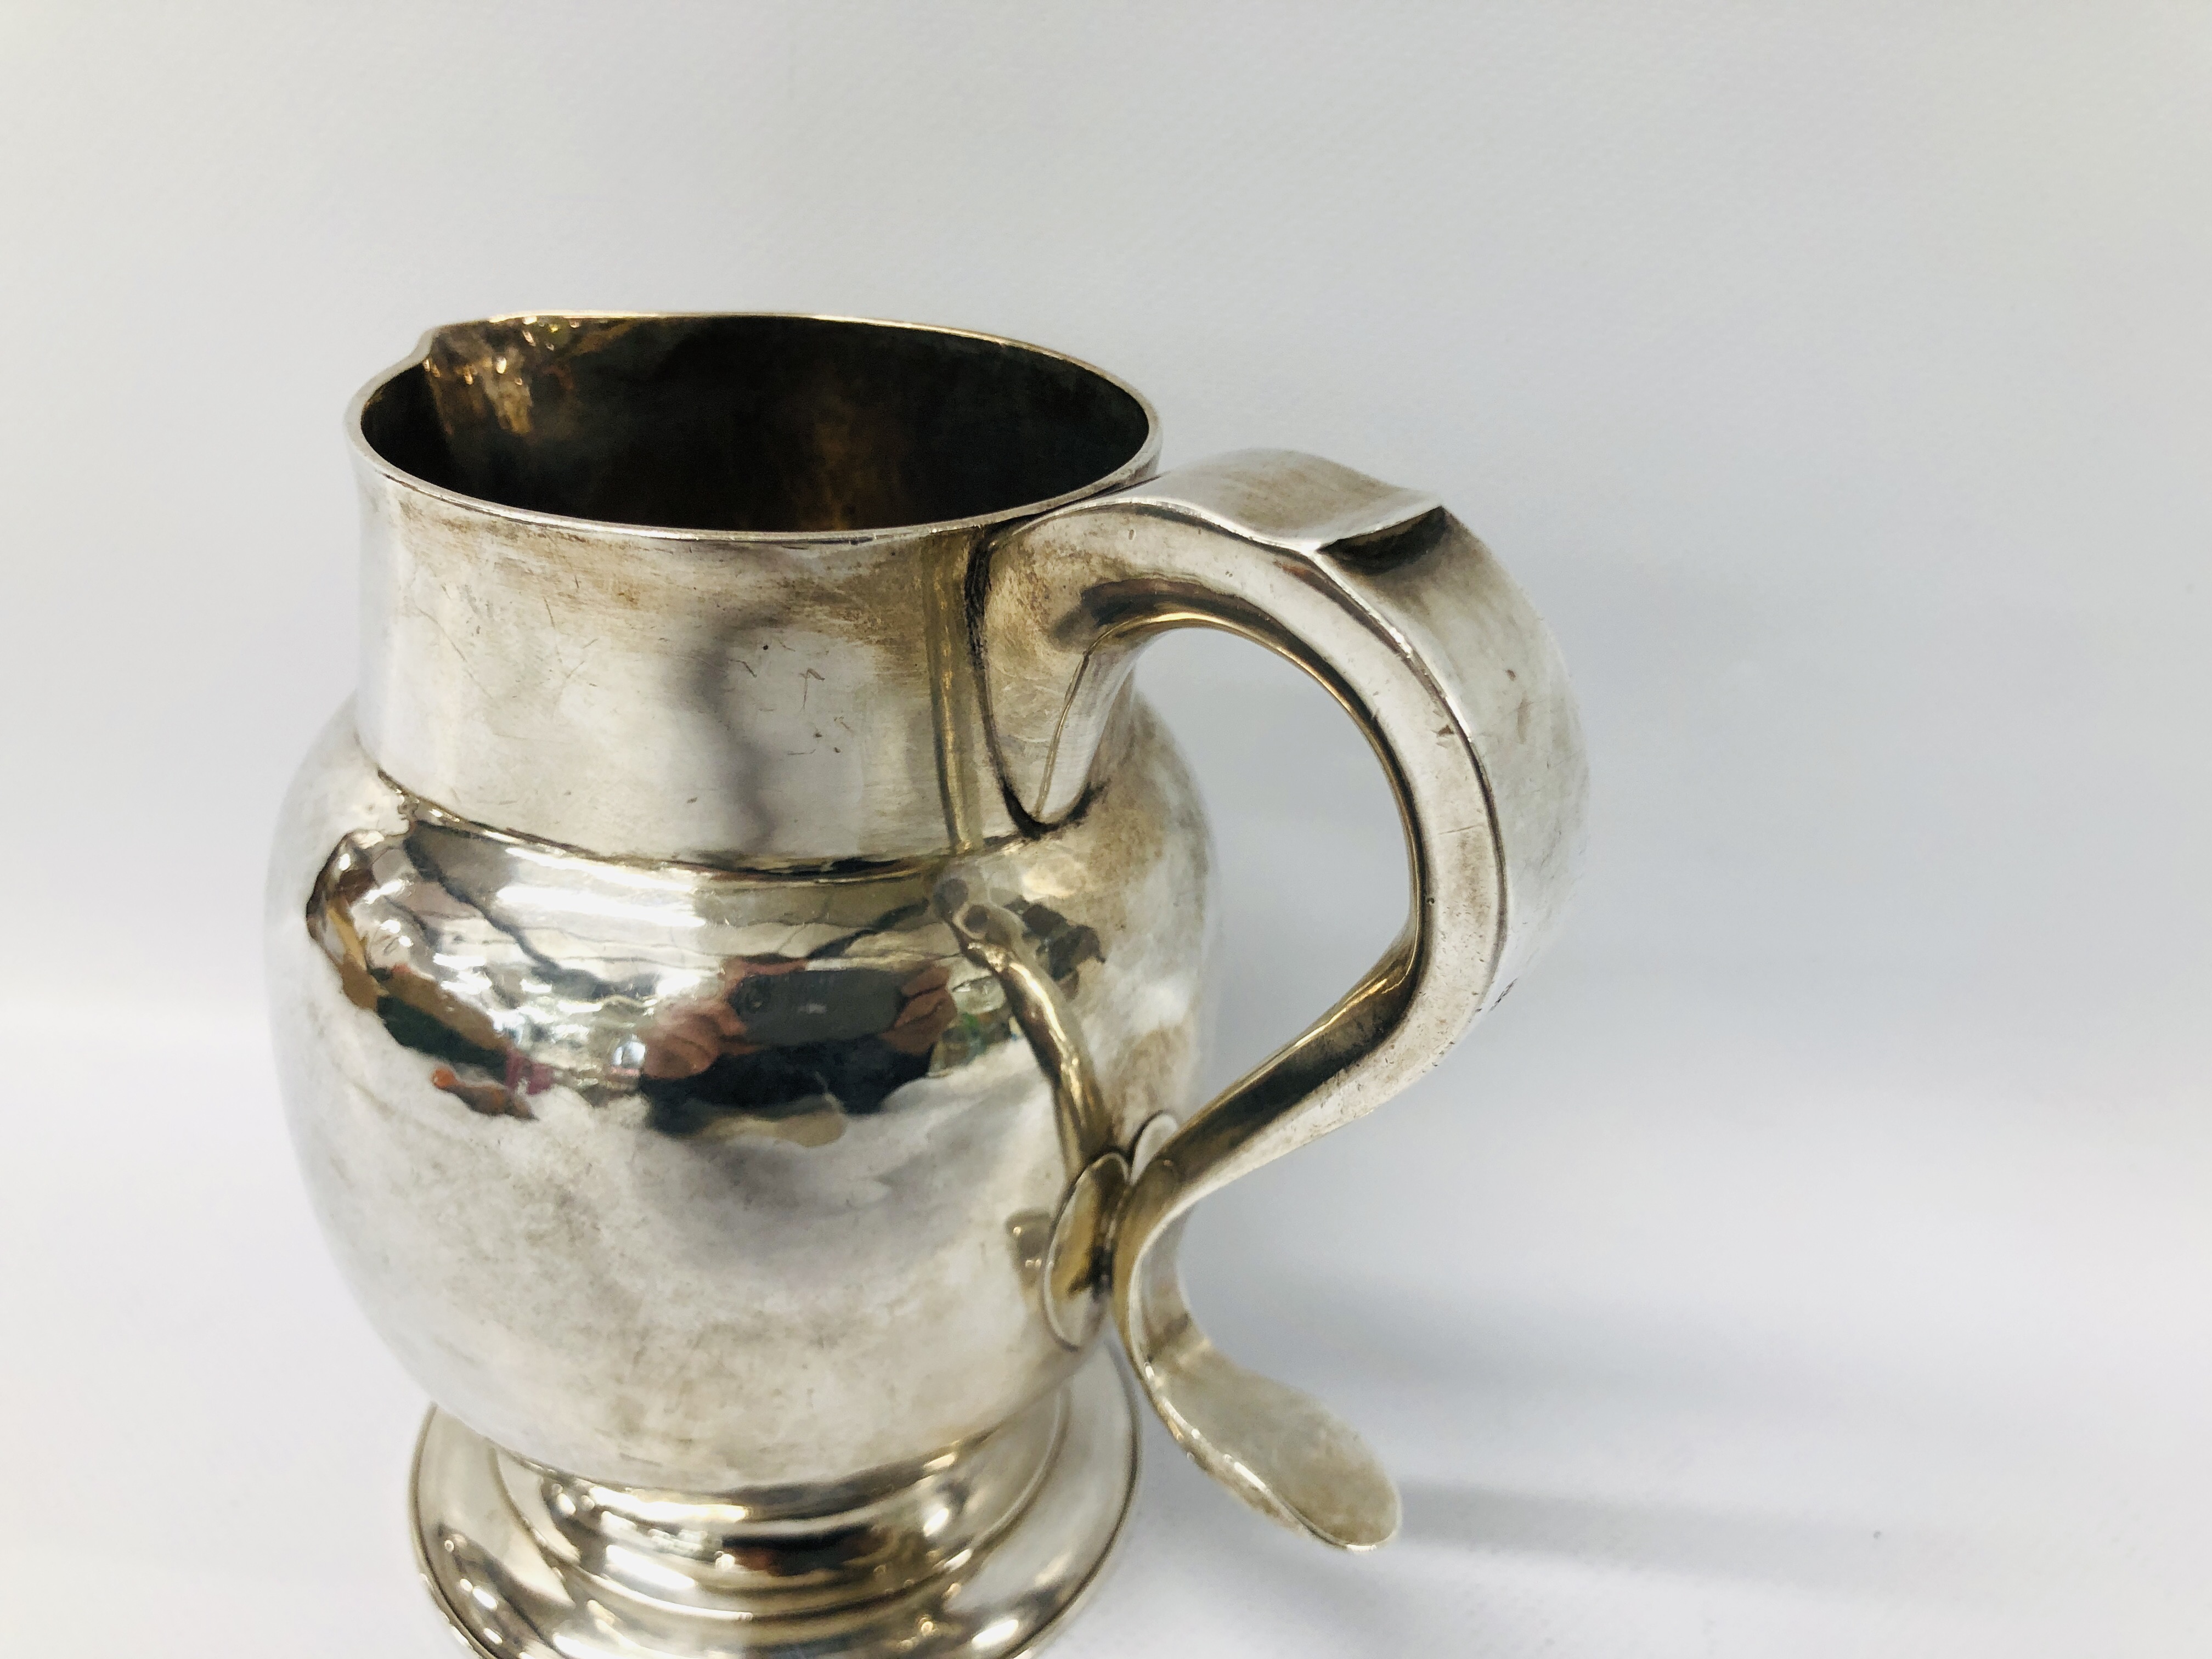 A GEORGE III SILVER JUG, THE 'S' SHAPED HANDLE ON A PLAIN BULBOUS BODY, NEWCASTLE 1790, J. - Image 5 of 21